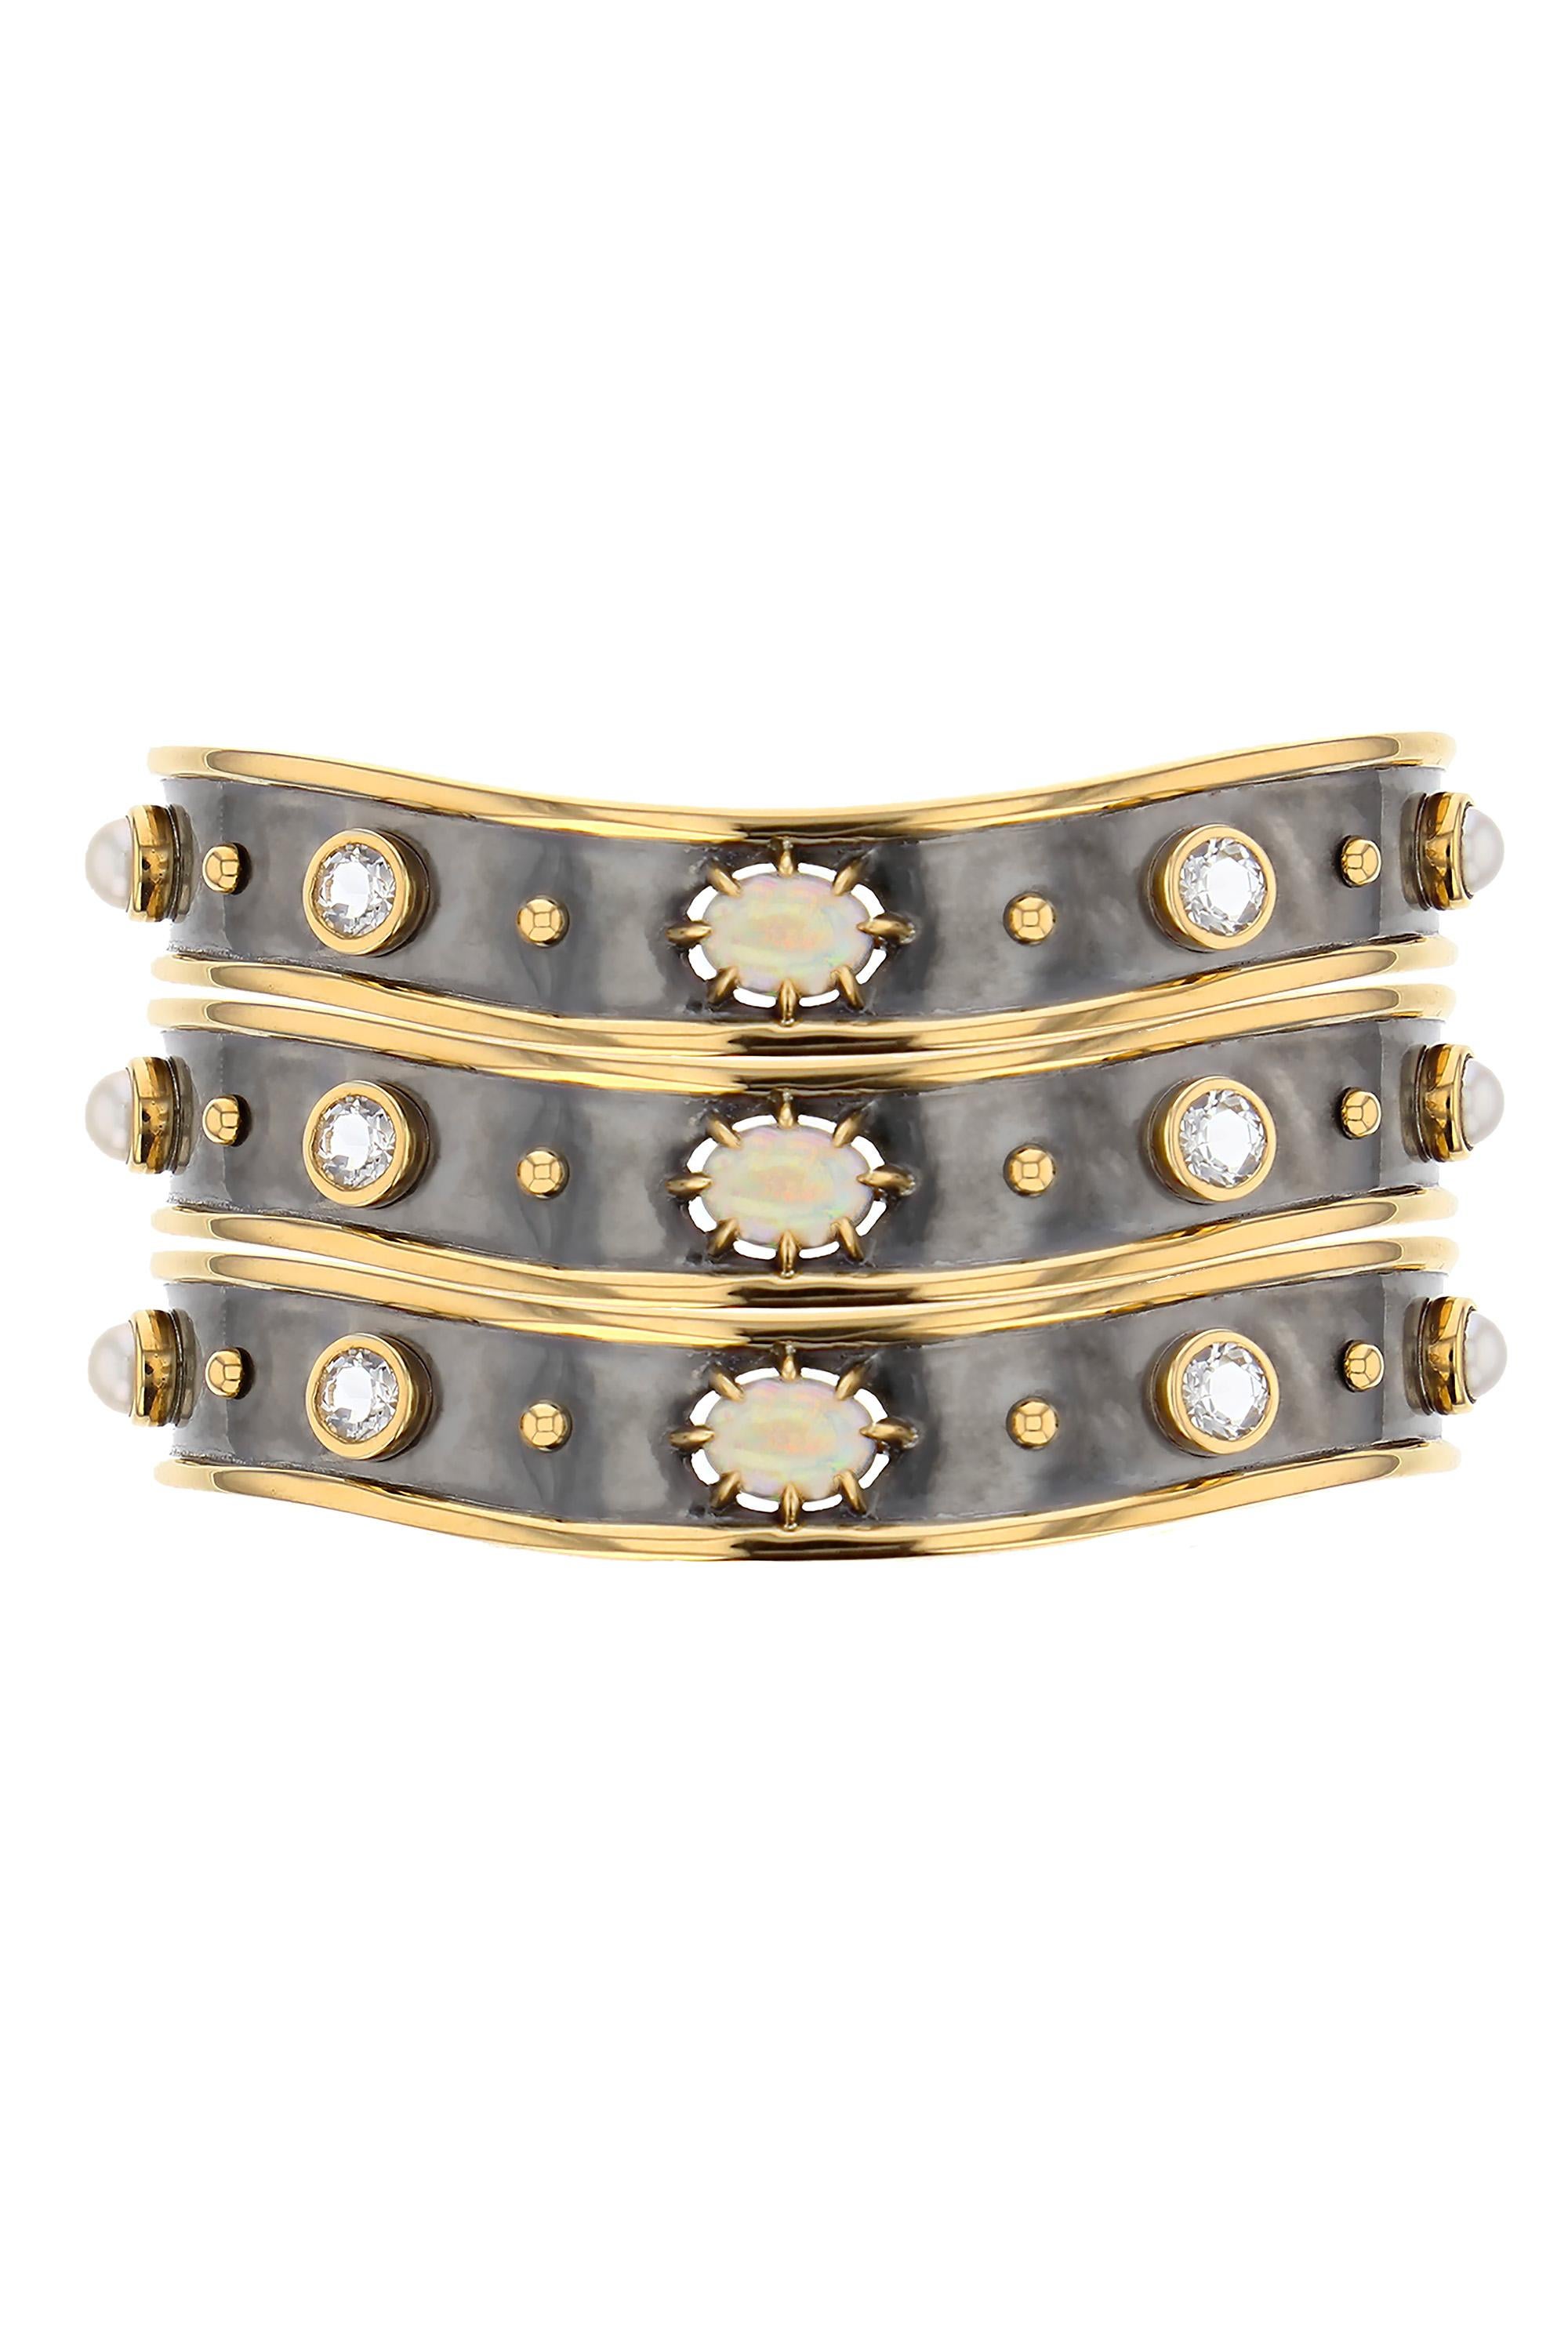 Yellow gold and distressed silver bracelet, studded with an opal, akoya pearls and white sapphires.

Details:
Opal, White  Sapphire and Akoya Pearls
White Sapphire: 1.2 cts
18k Yellow Gold: 17 g 
Distressed Silver: 11 g
Made in France